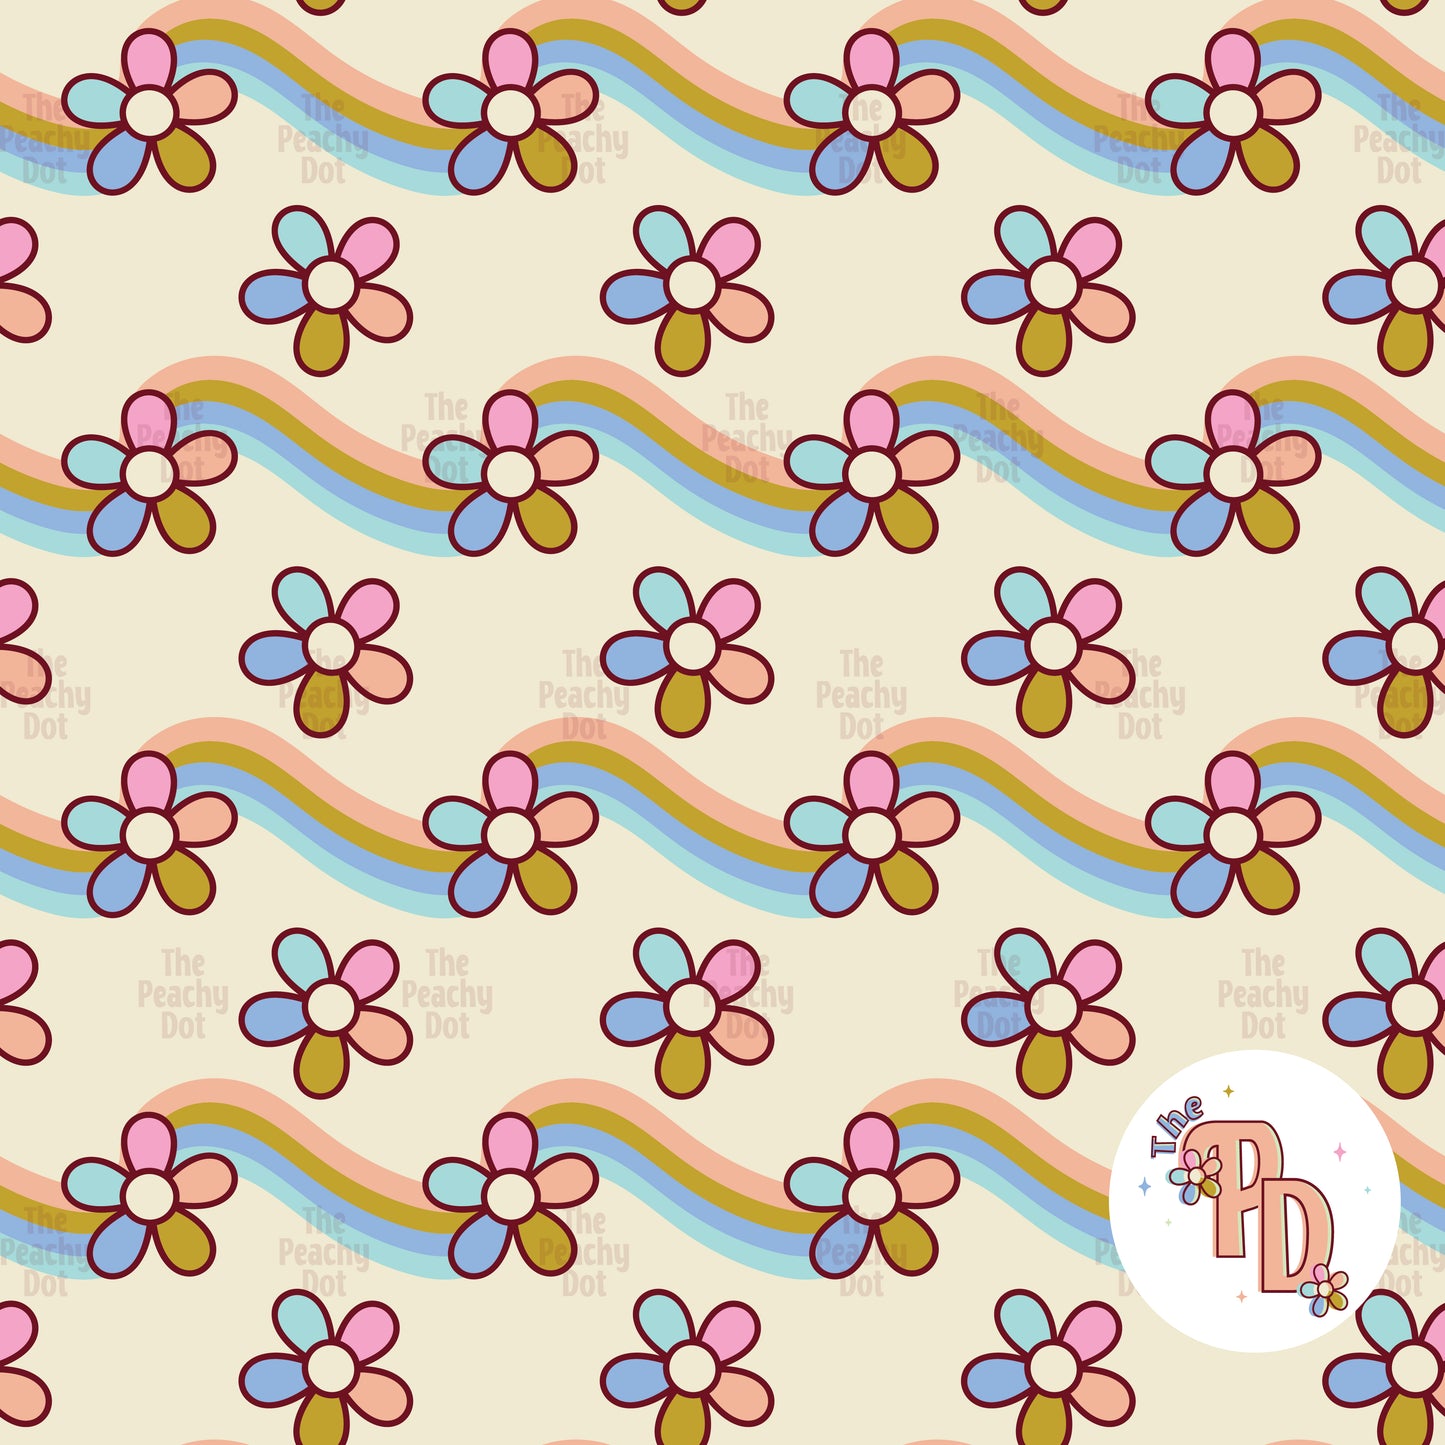 The Peachy Dot Collection Patterns